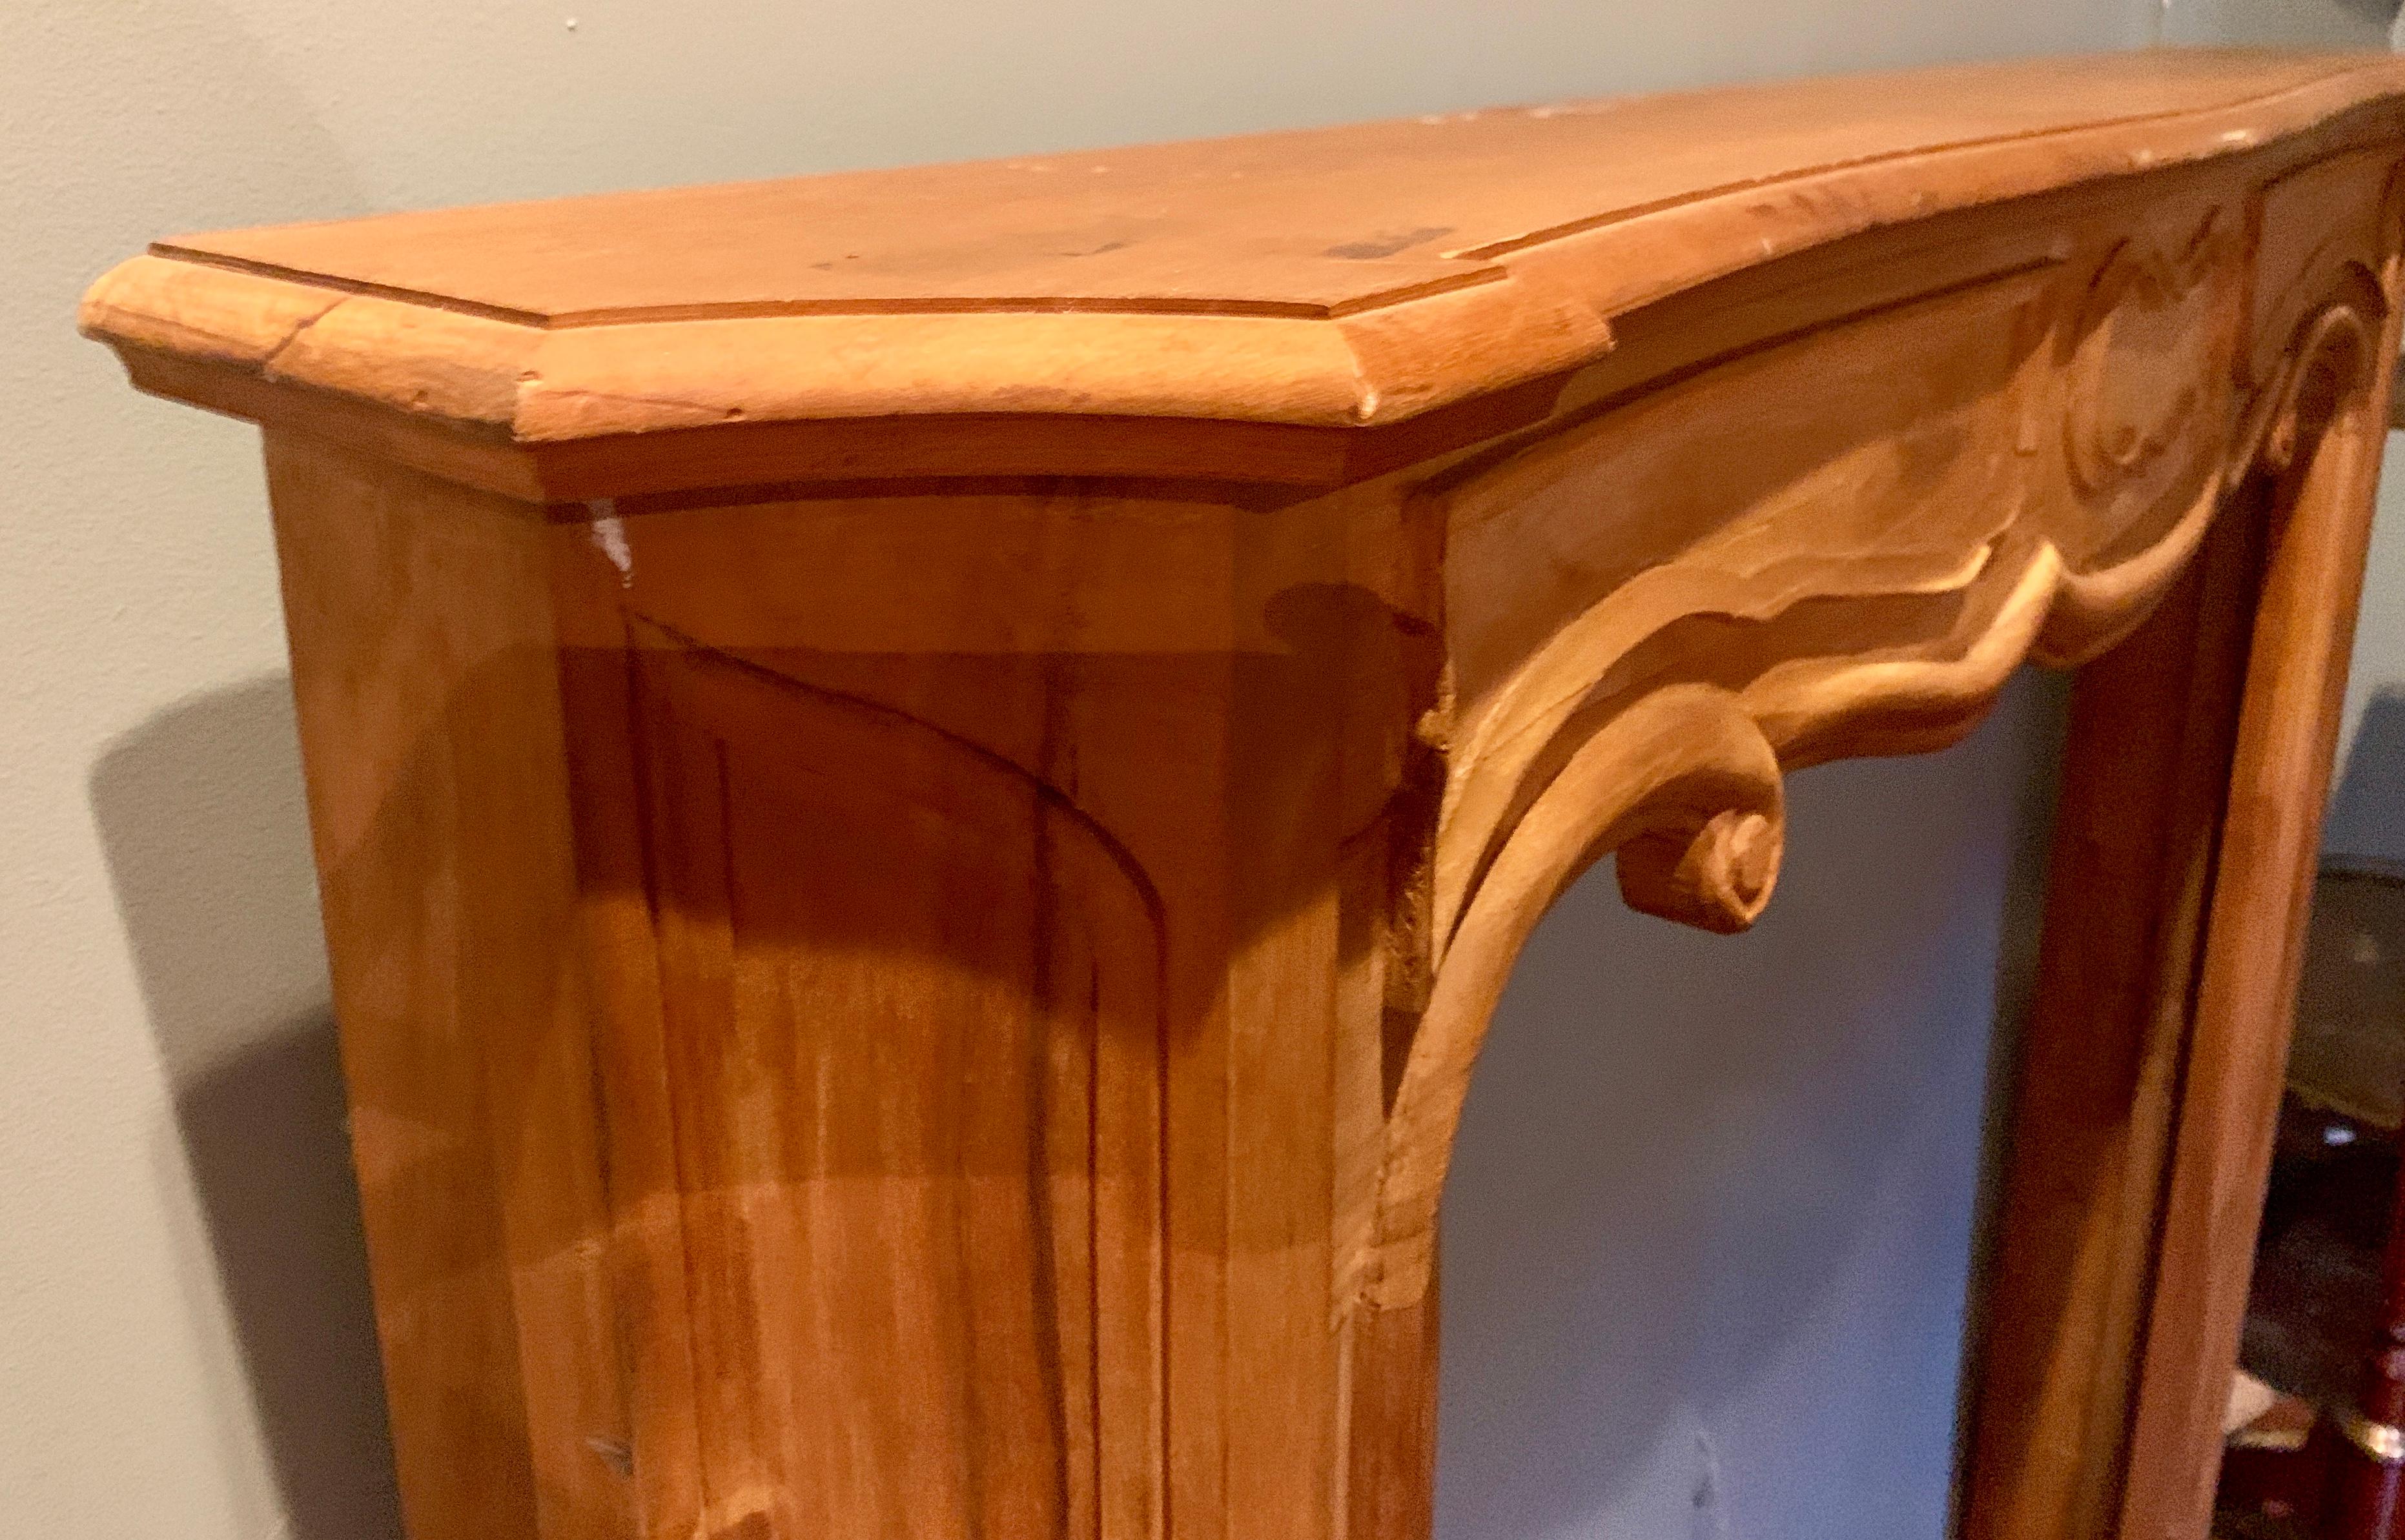 This hand-carved mantel has simple, strong lines. It would work well in a variety of homes. The walnut is a lovely color, too.

